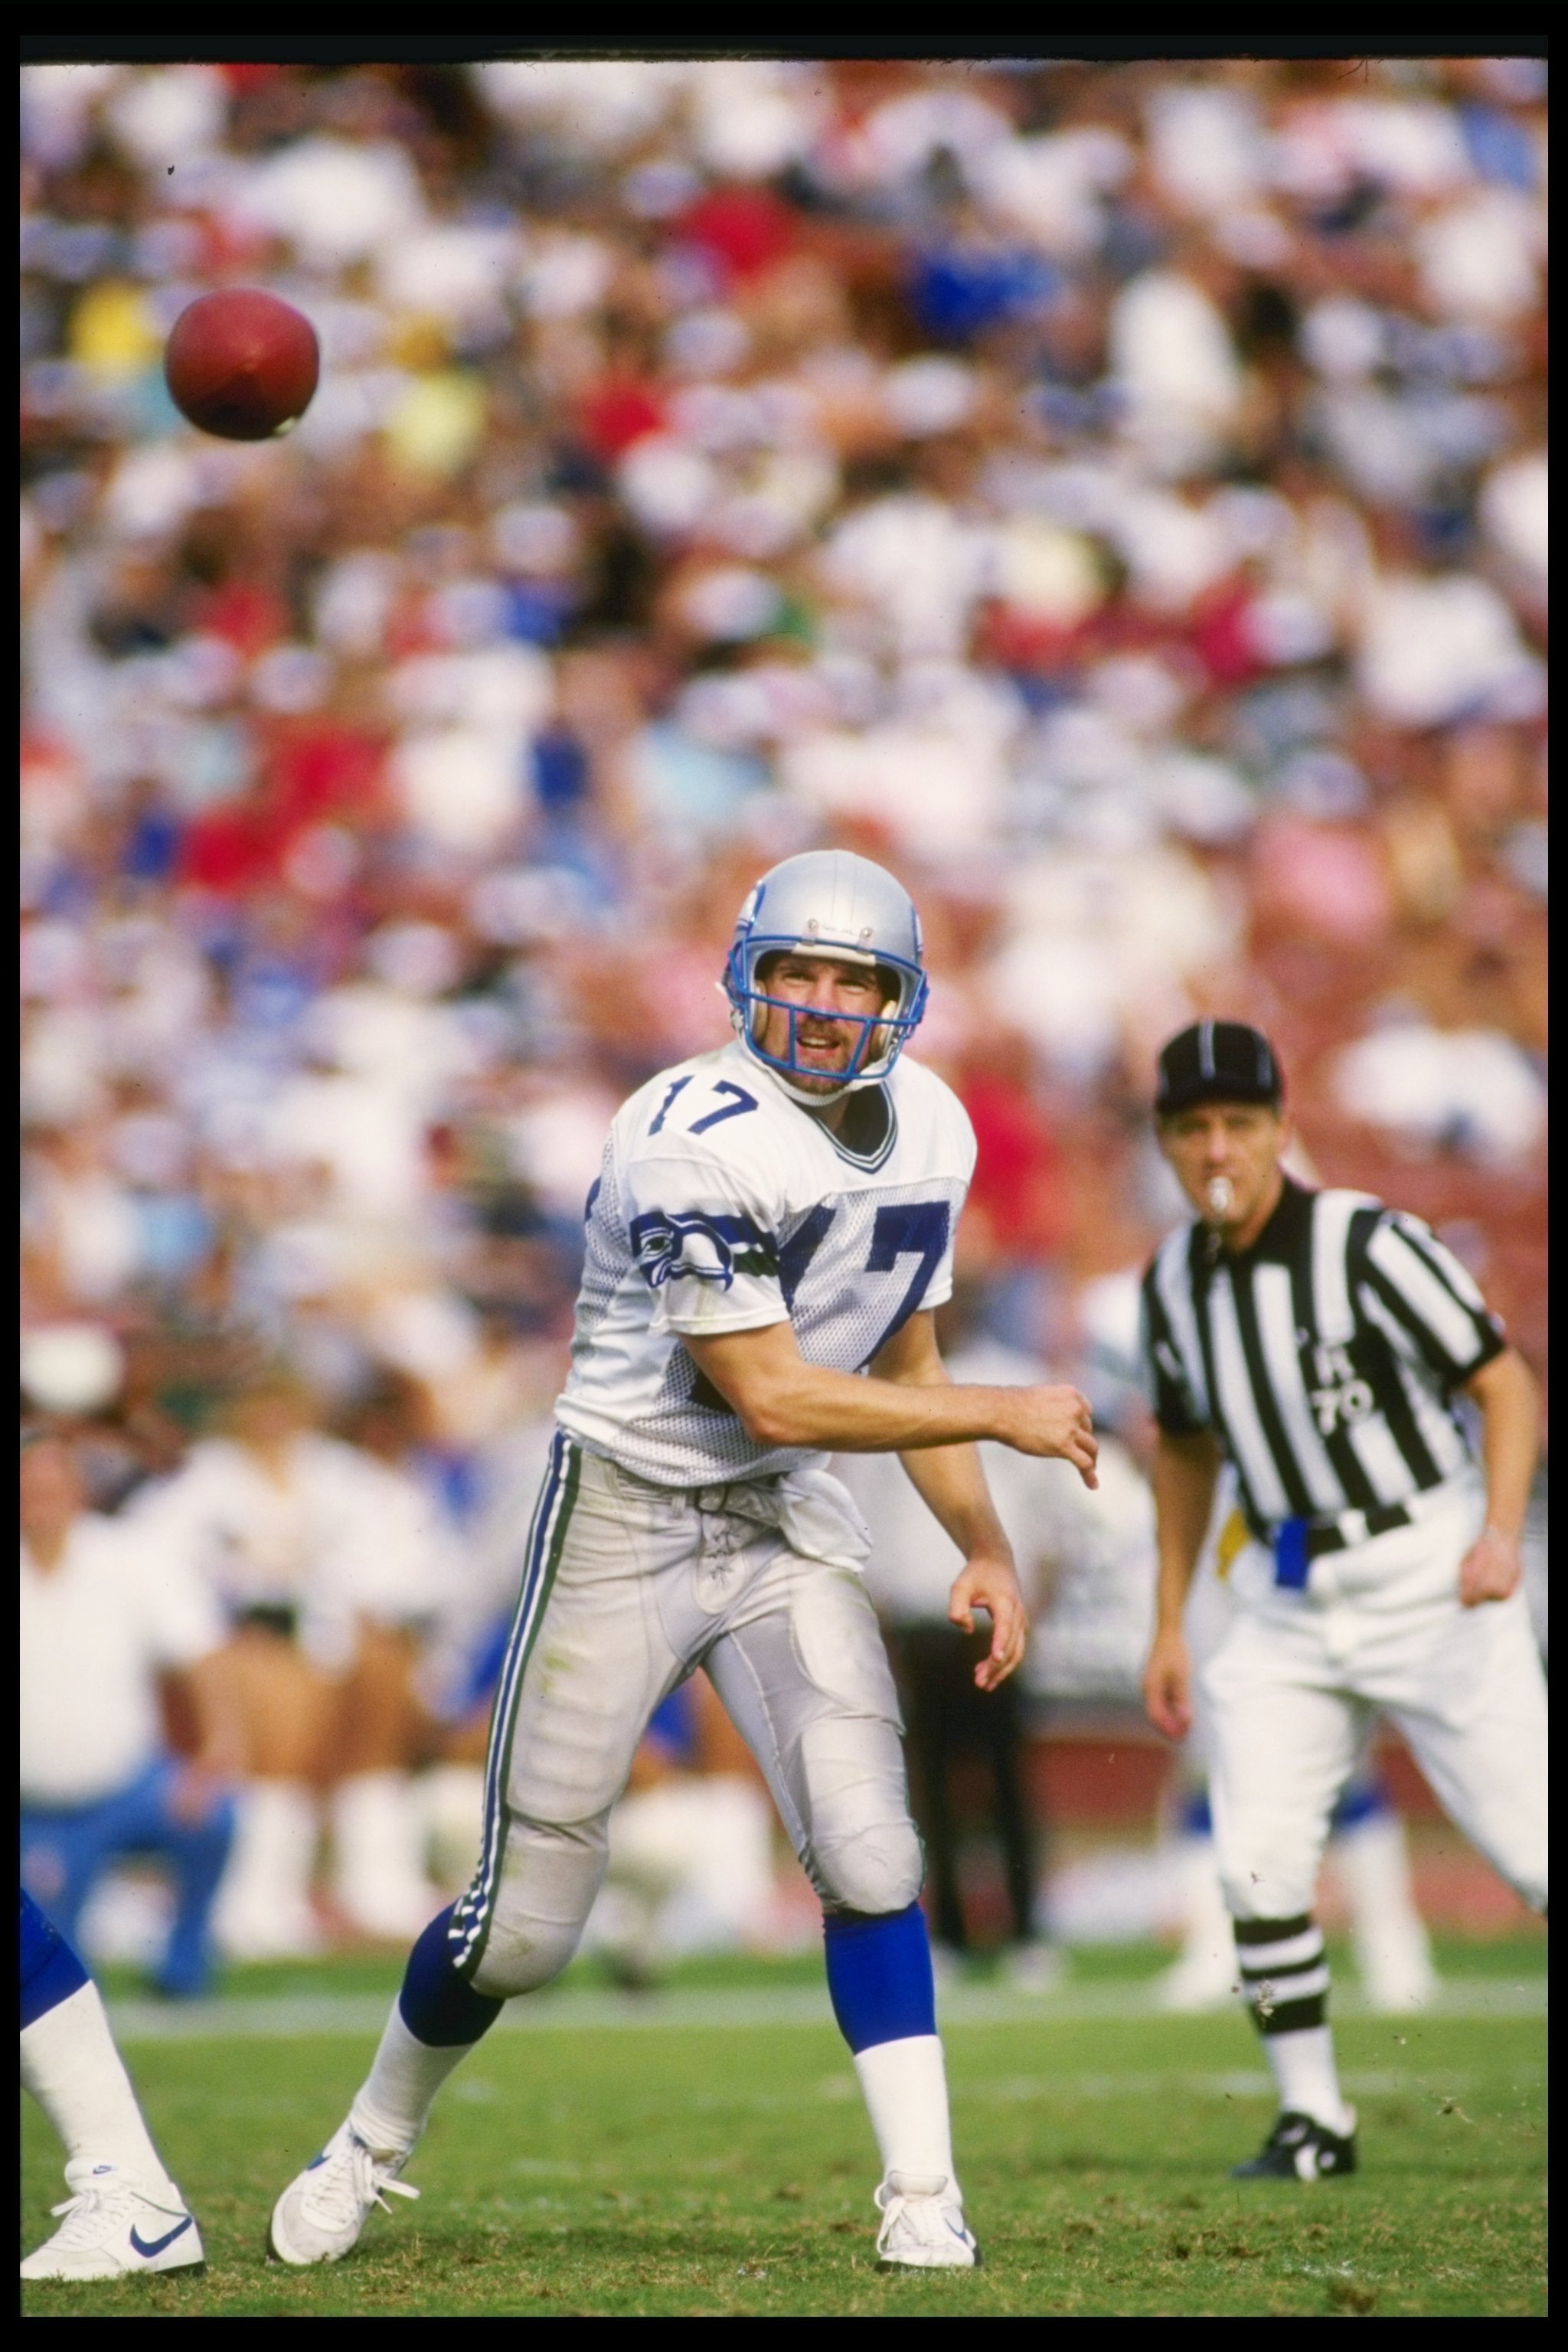 25 Oct 1987: Quarterback Dave Krieg of the Seattle Seahawks passes the ball during a game against the Los Angeles Raiders at the Los Angeles Memorial Coliseum in Los Angeles, California. The Seahawks won the game, 35-13.